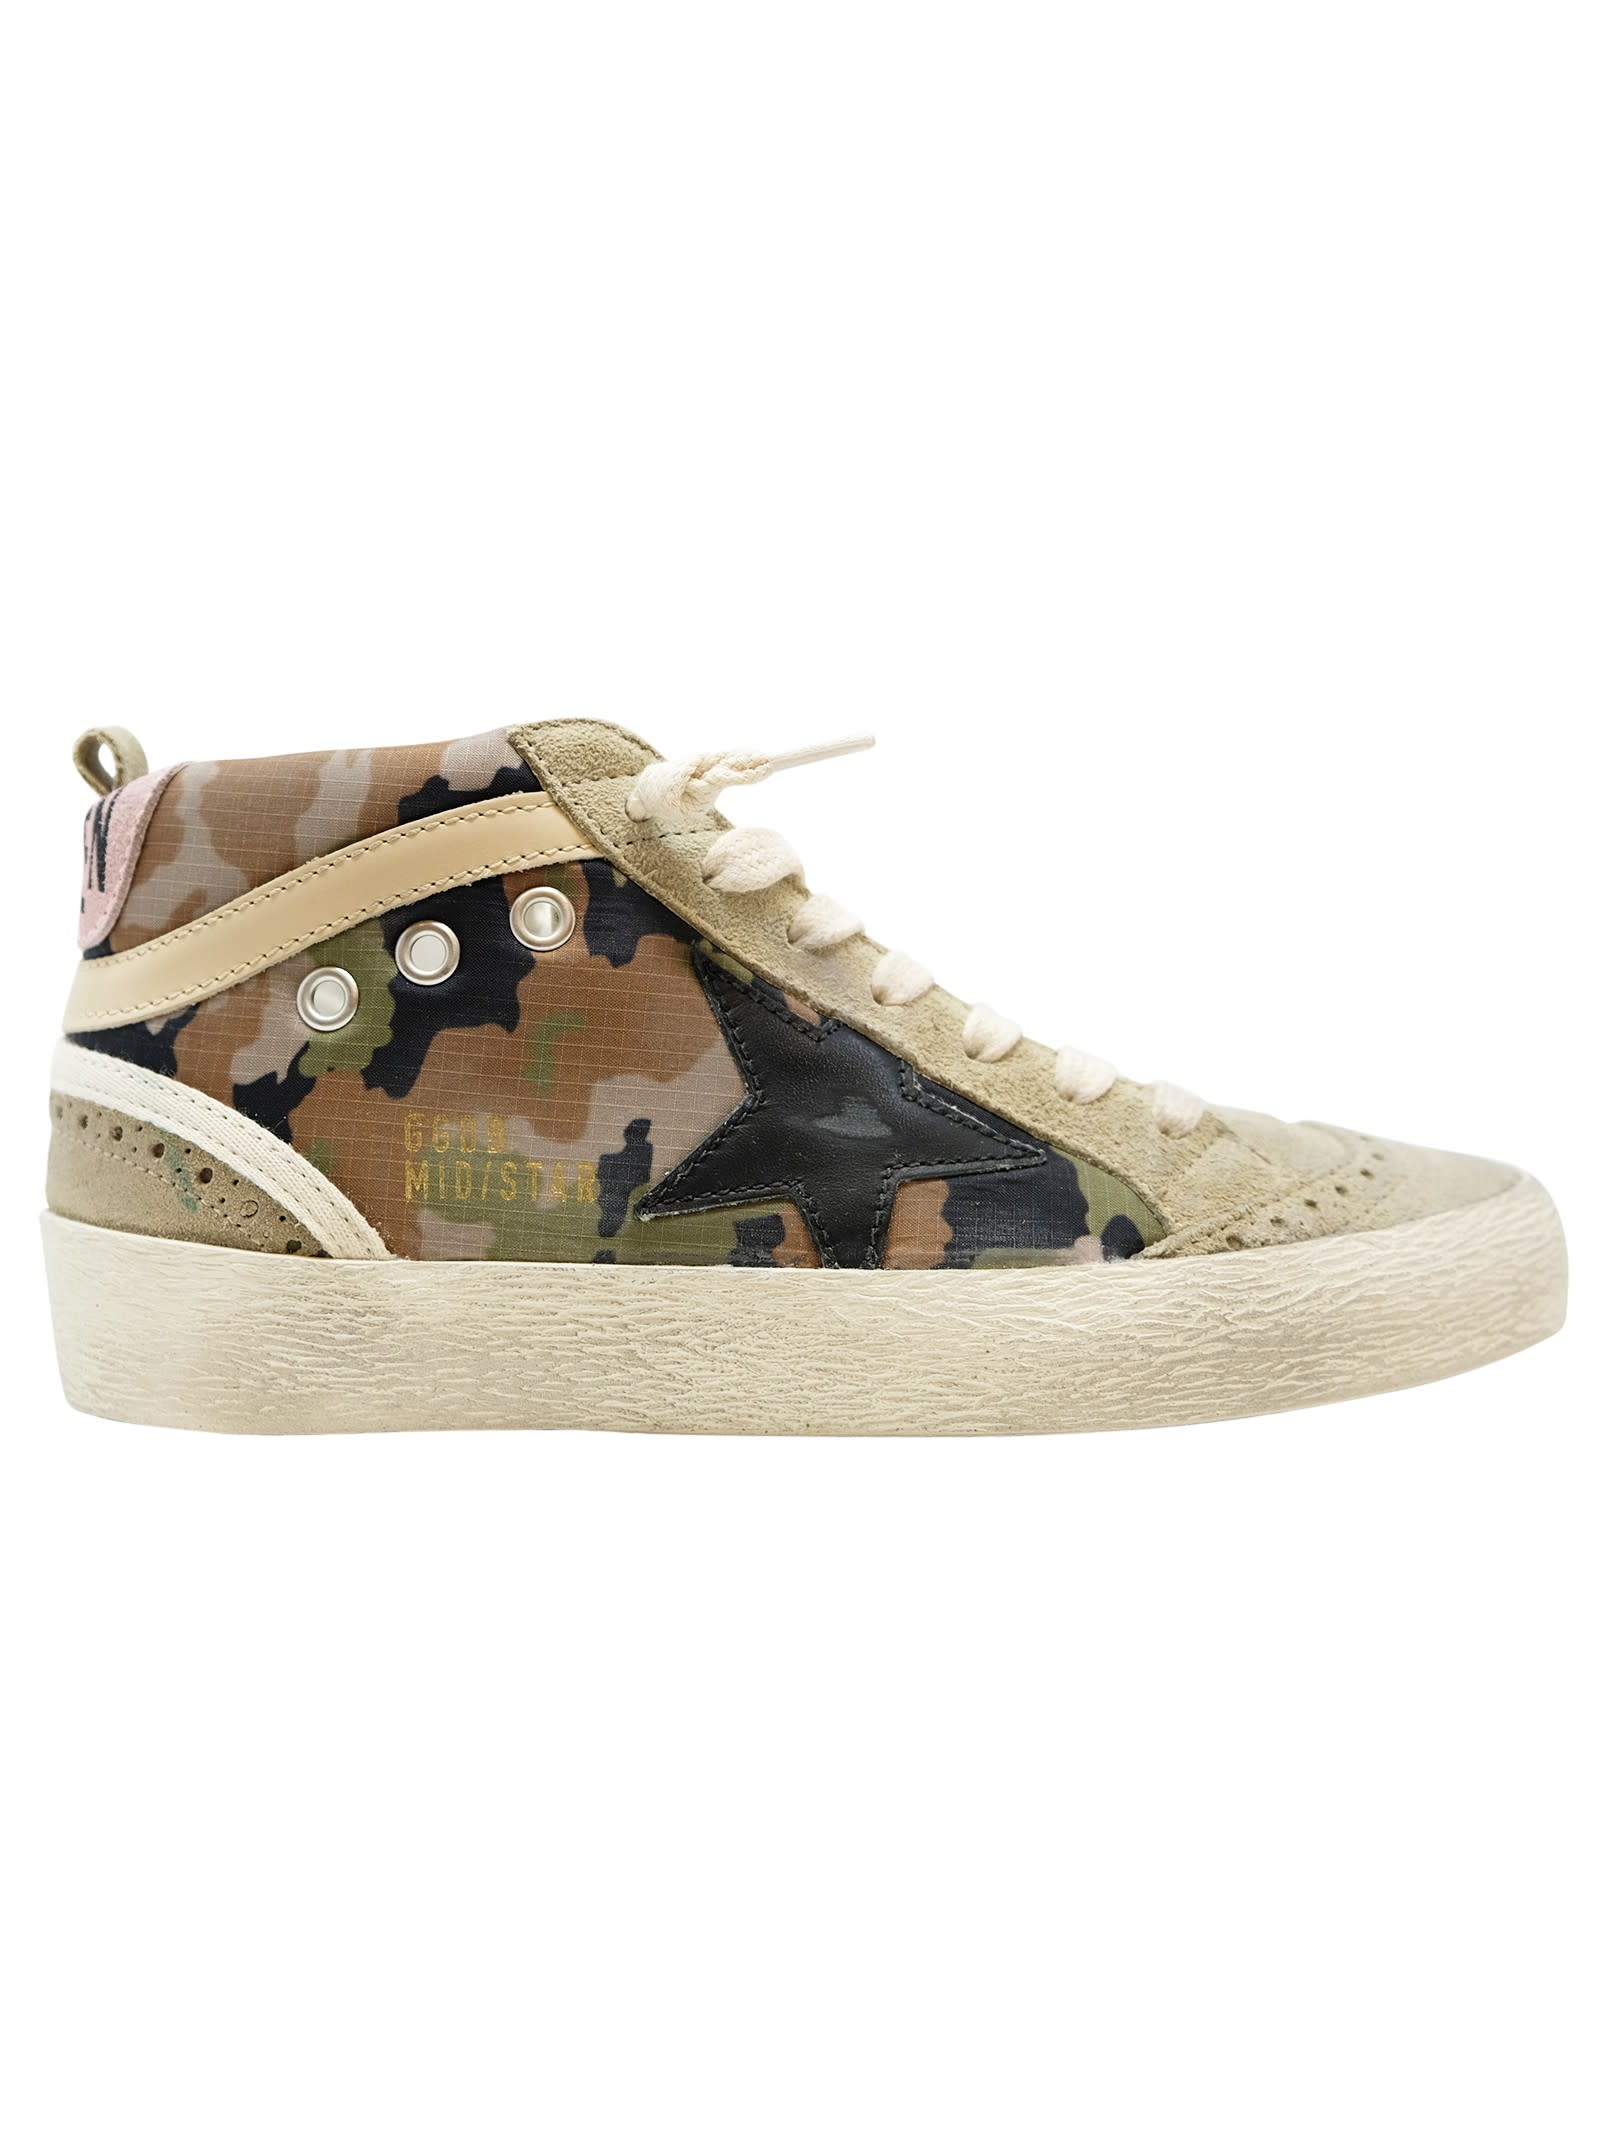 Golden Goose Camouflage Leather Mid Star Sneakers